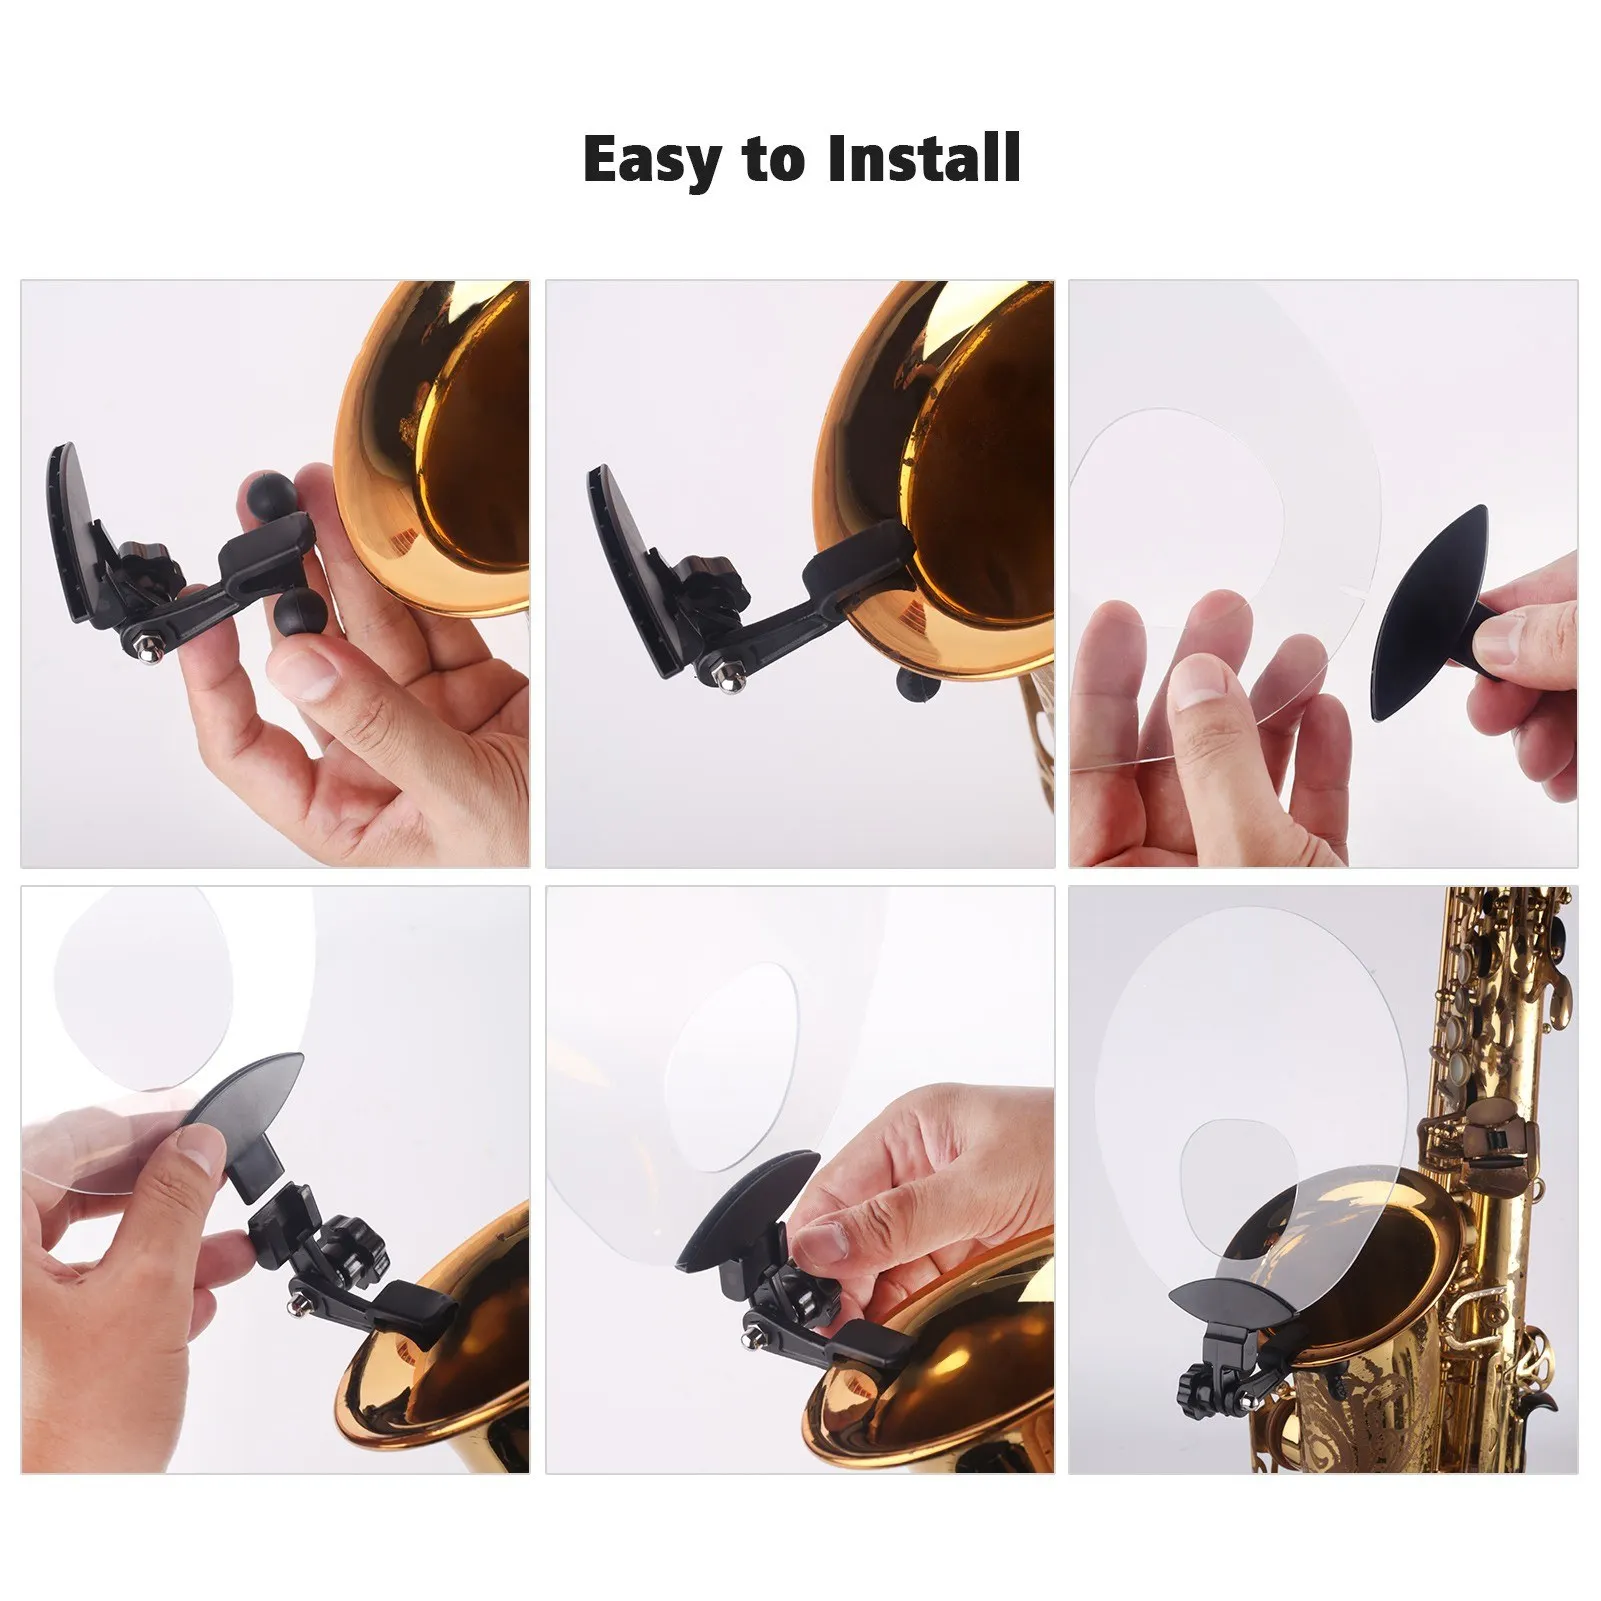 
Plastic Saxophone Deflector Sound Deflector Shield with Mute & Reflect Sound Functions for Wind Instrument 